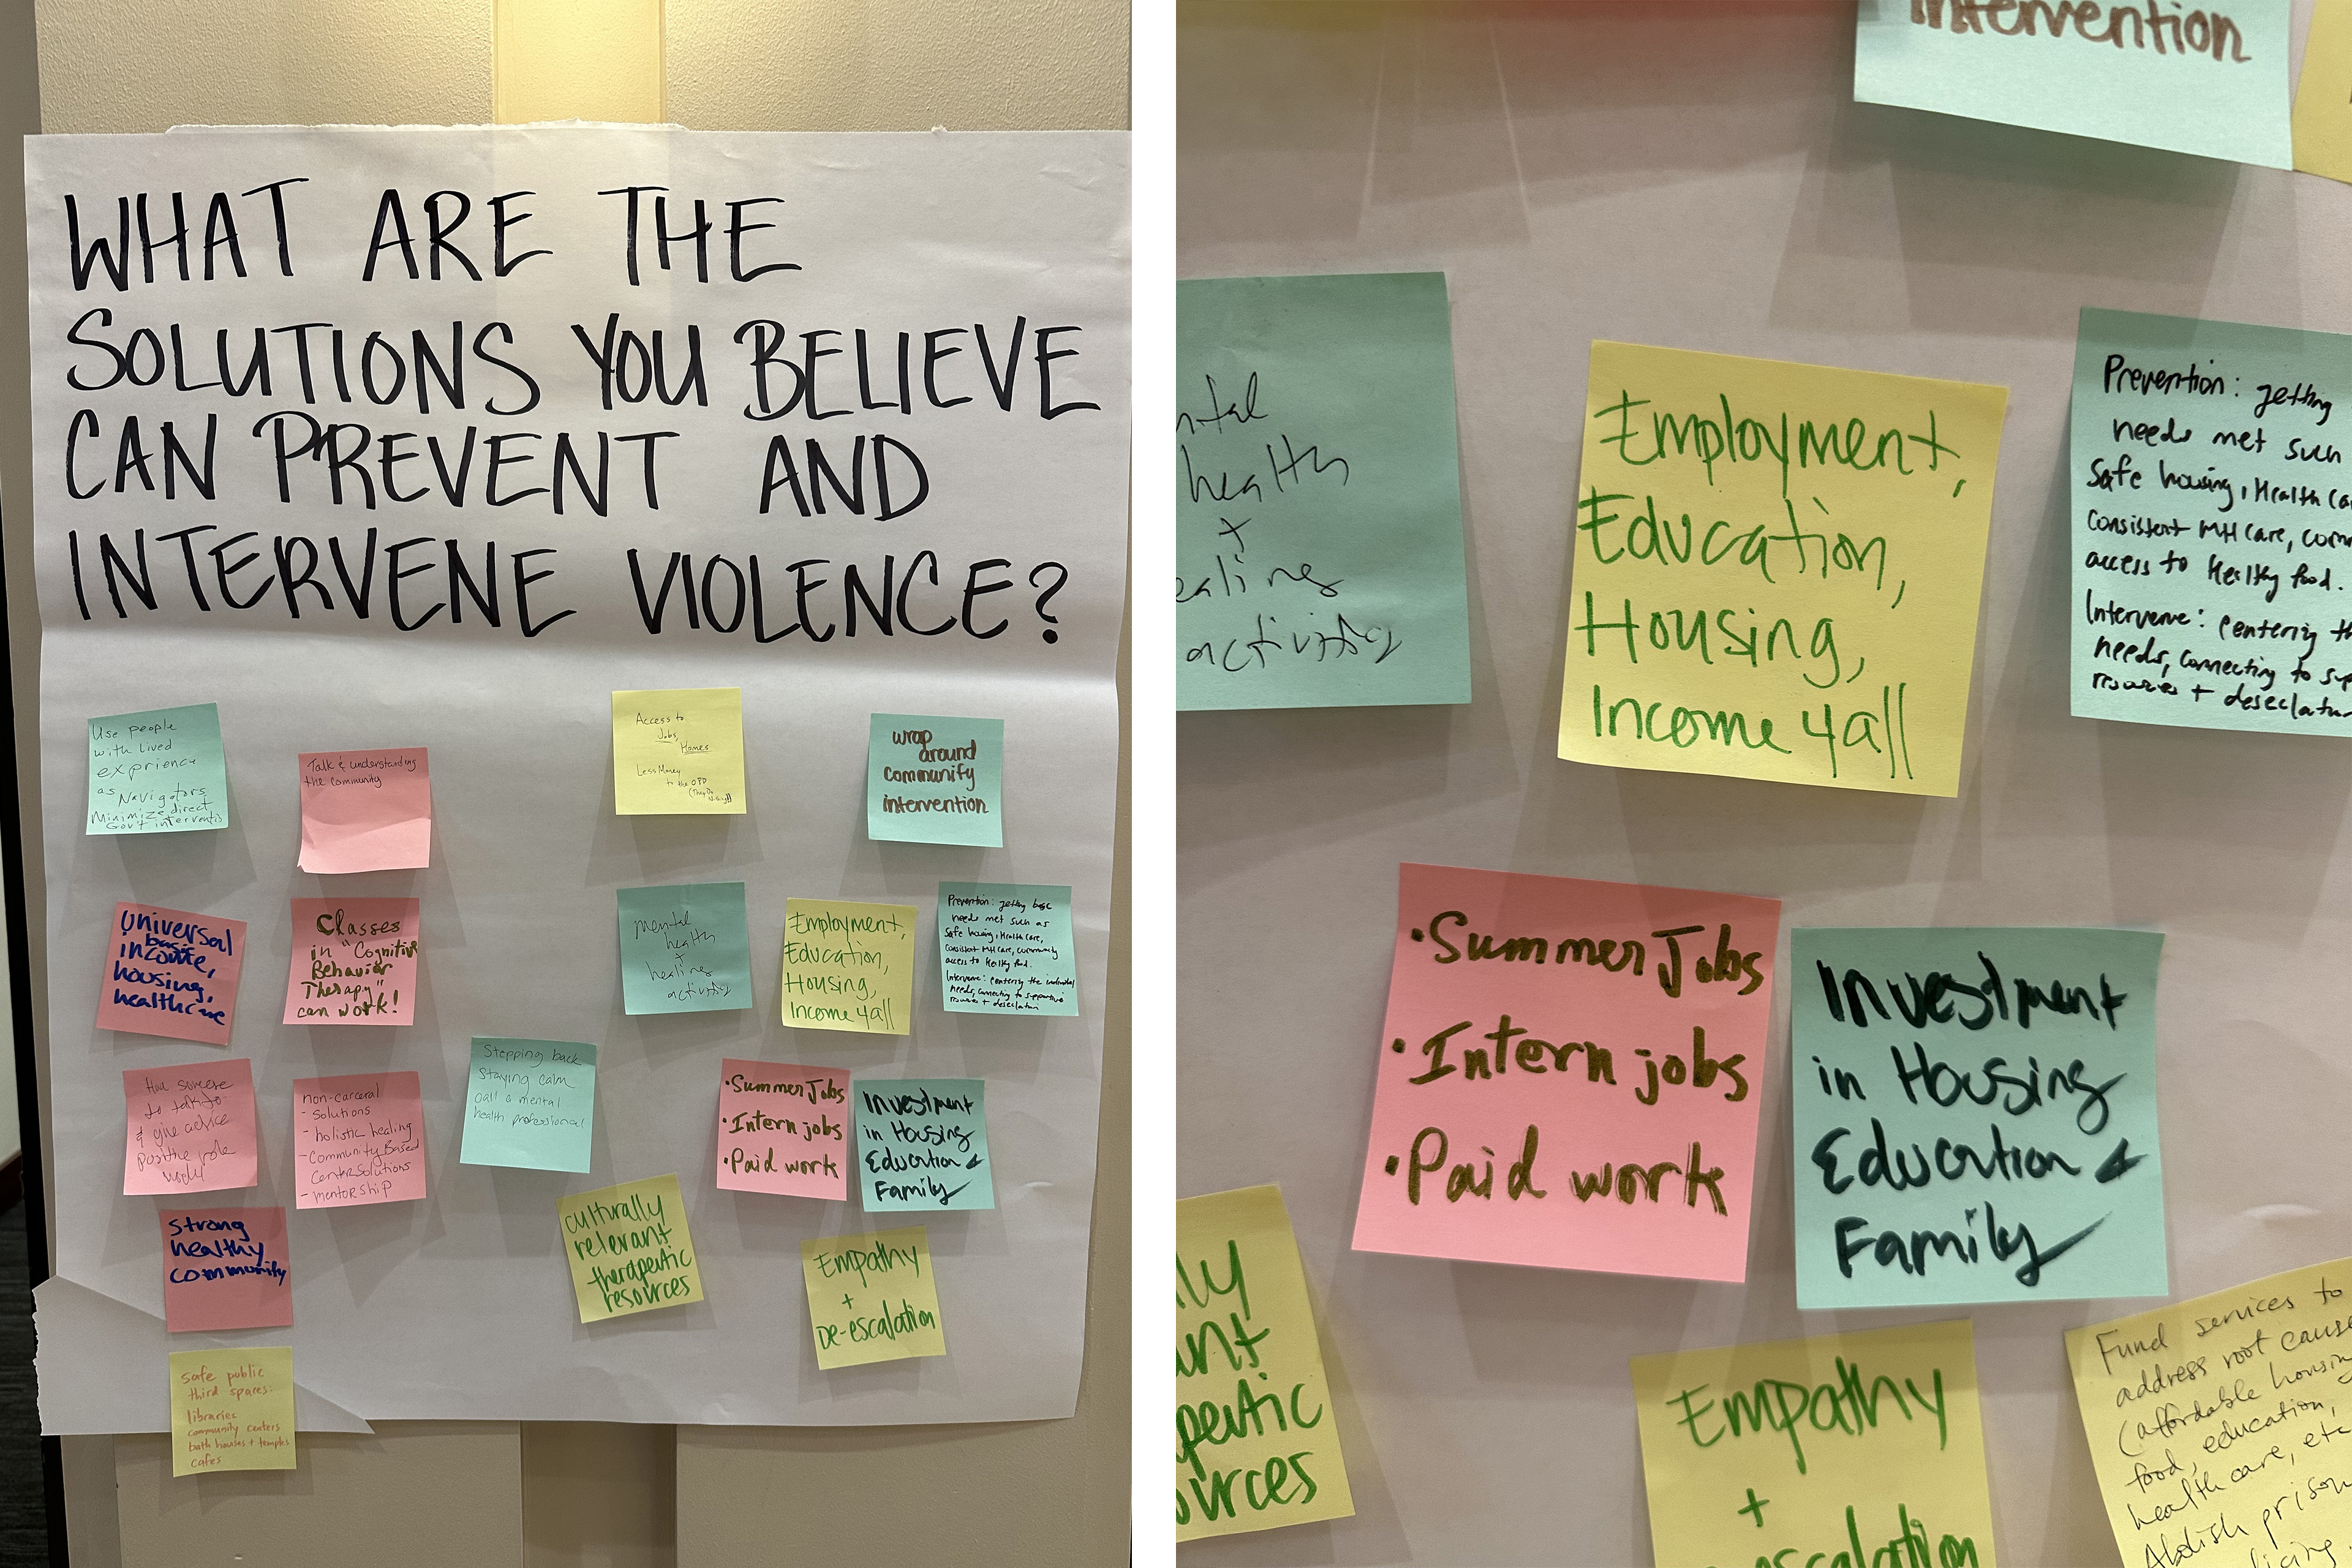 On the left, a large piece of paper hangs from a wall. It reads "What are the solutions you believe can prevent and intervene violence?" and 18 pastel sticky notes are attached beneath. On the right are close-ups of the sticky notes, with notes like "Employment, Education, Housing, Income 4-all."